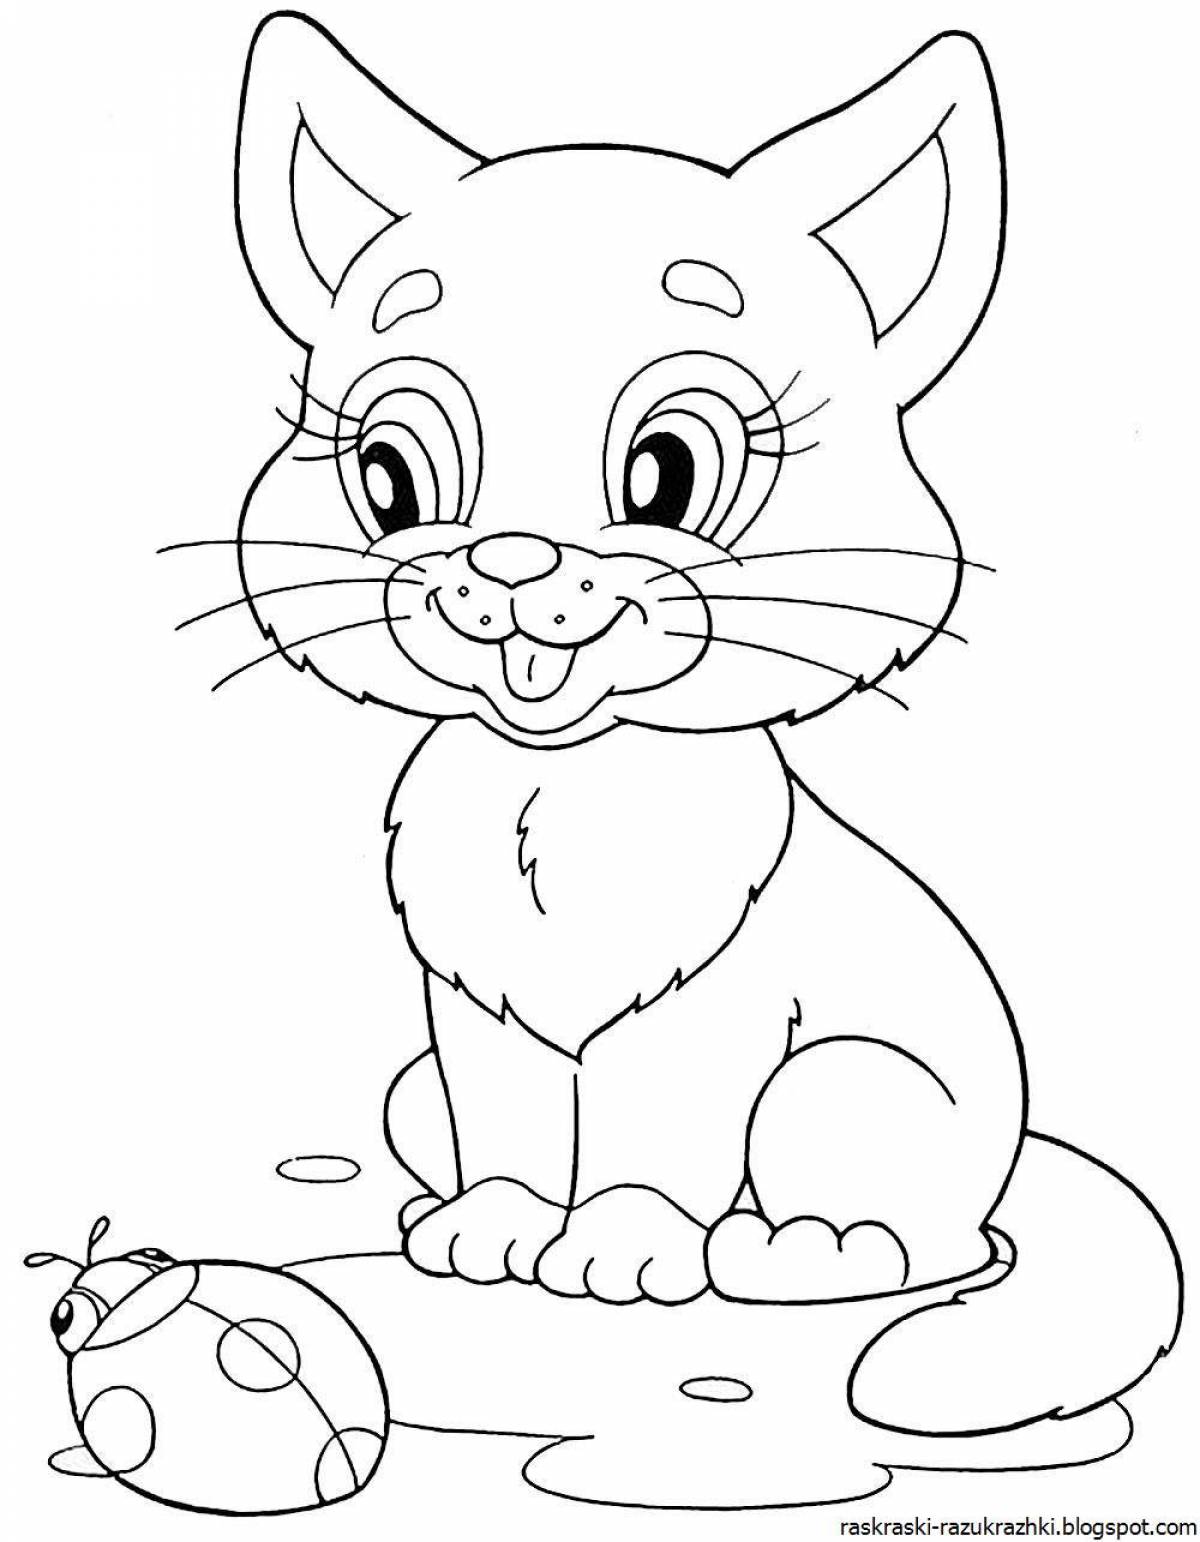 Sweet craybaby coloring page